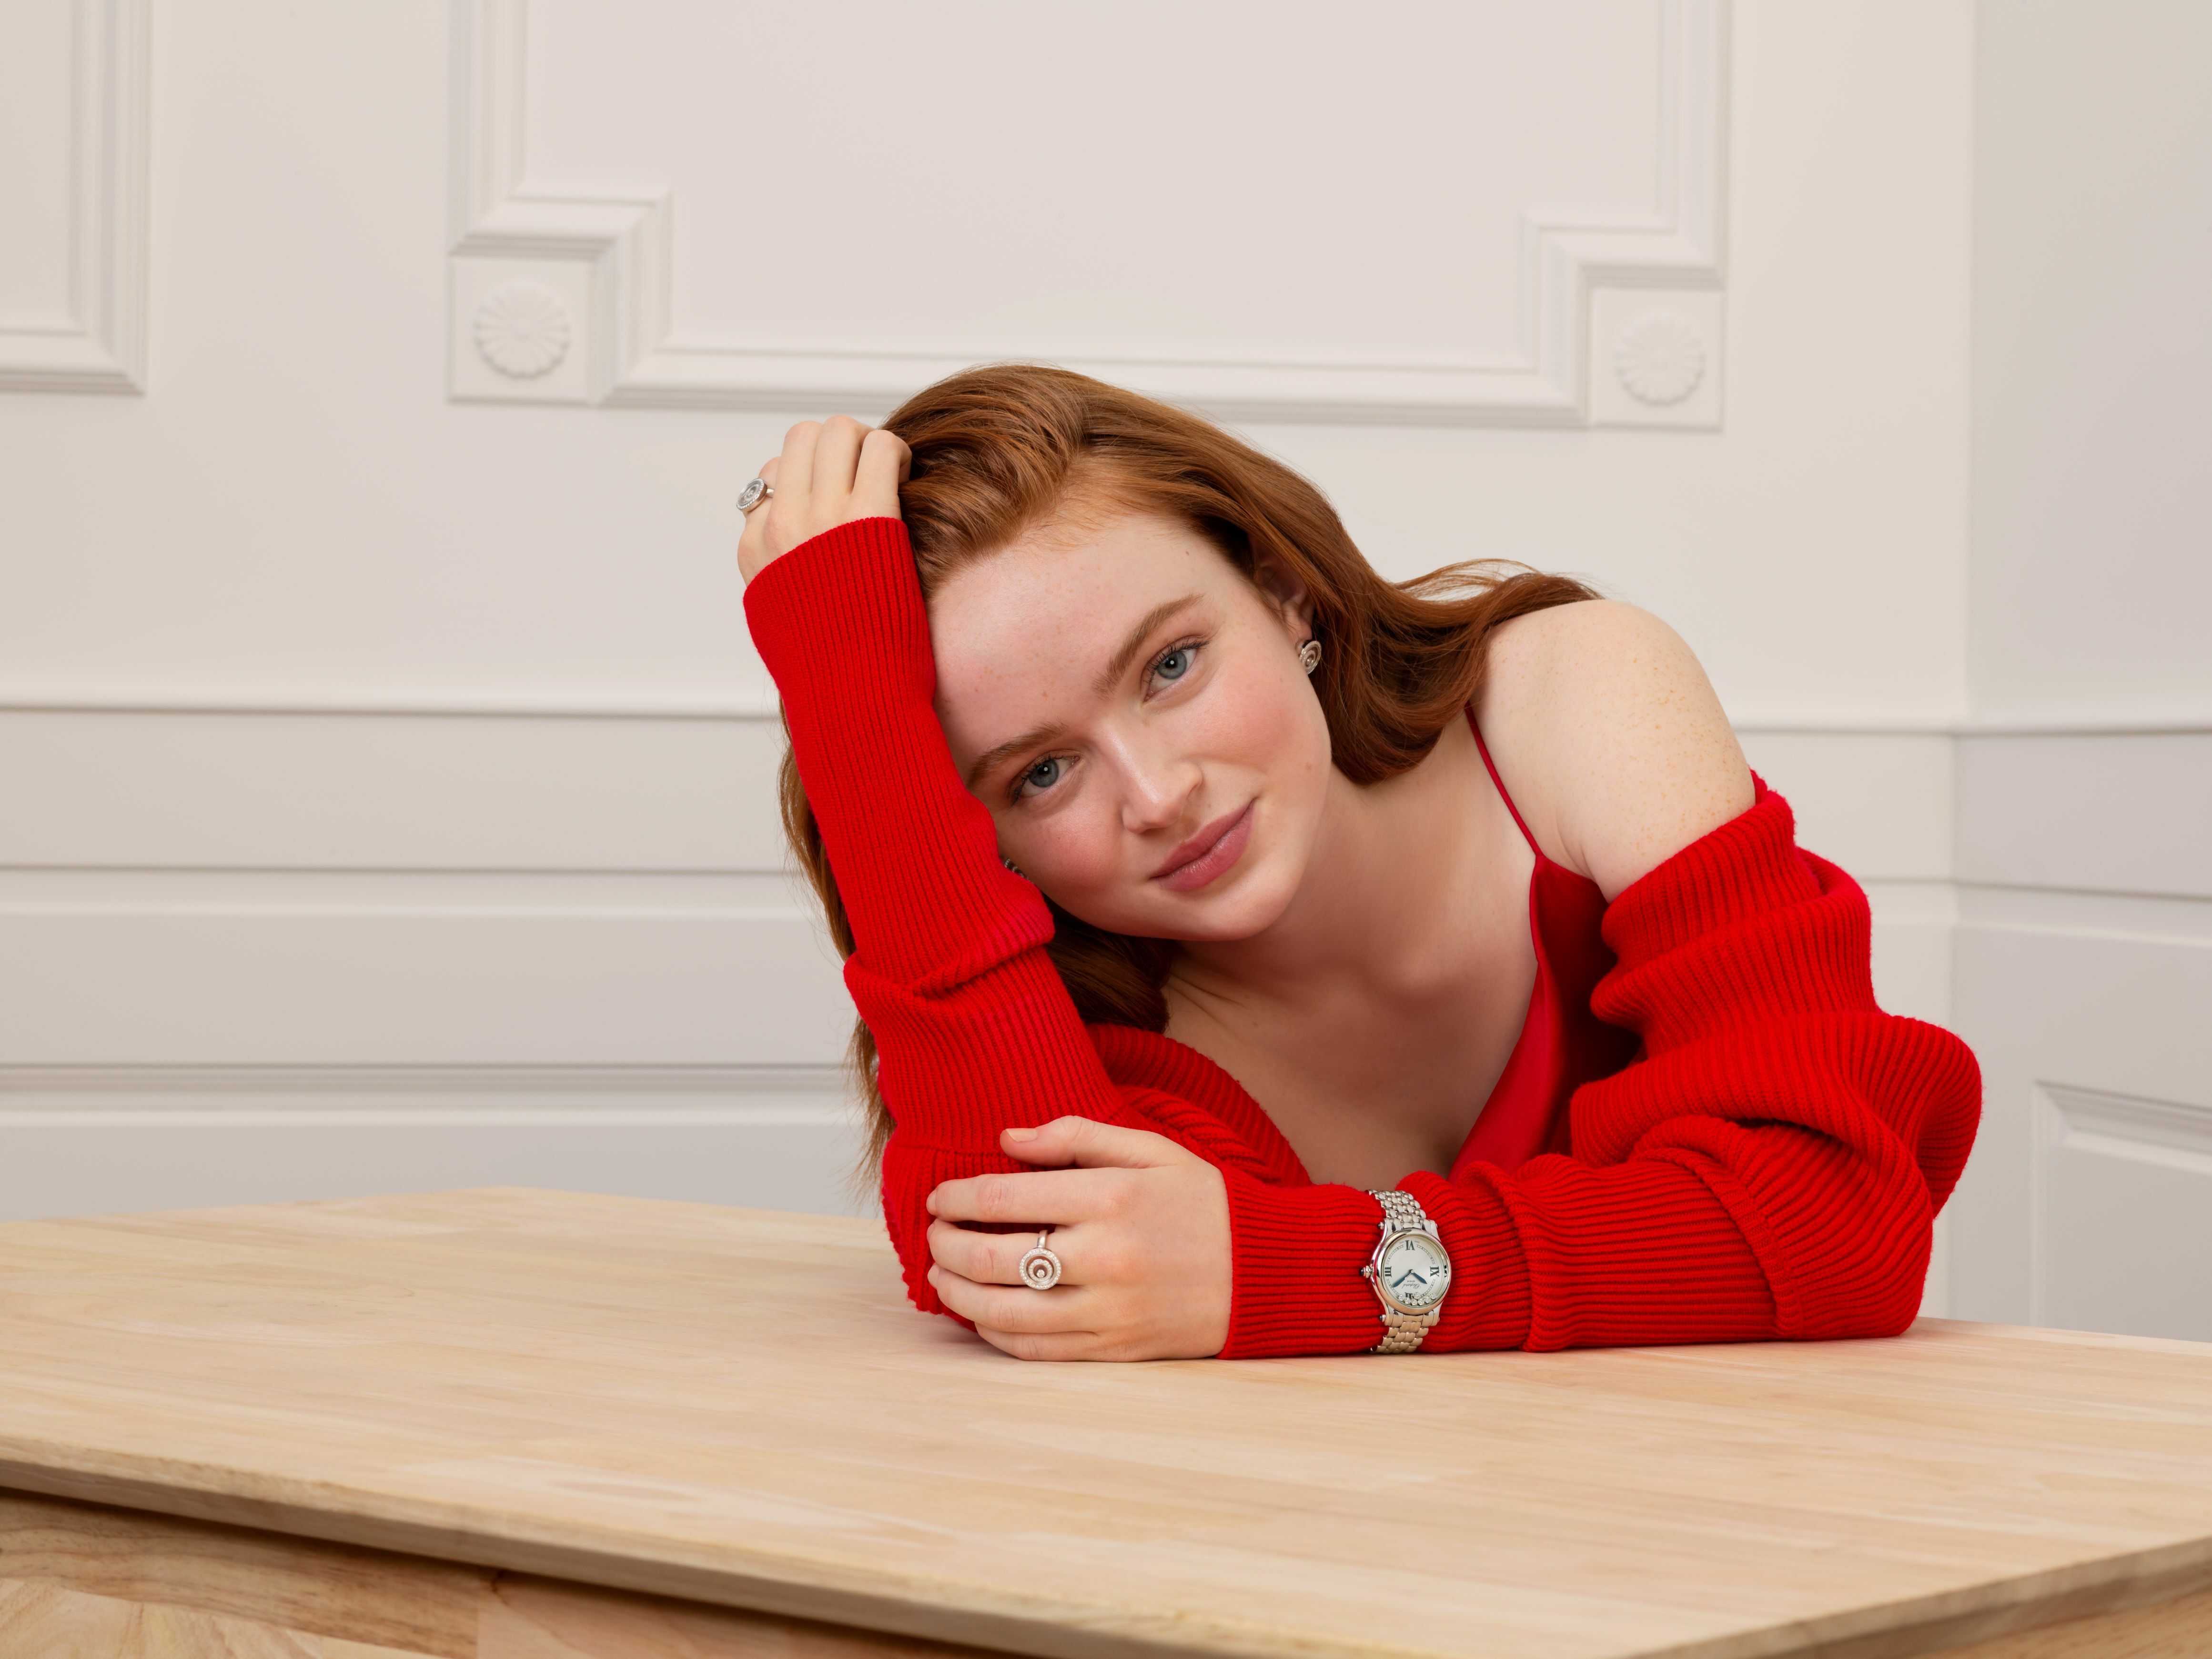 Redheaded Sadie Sink in a red sweater